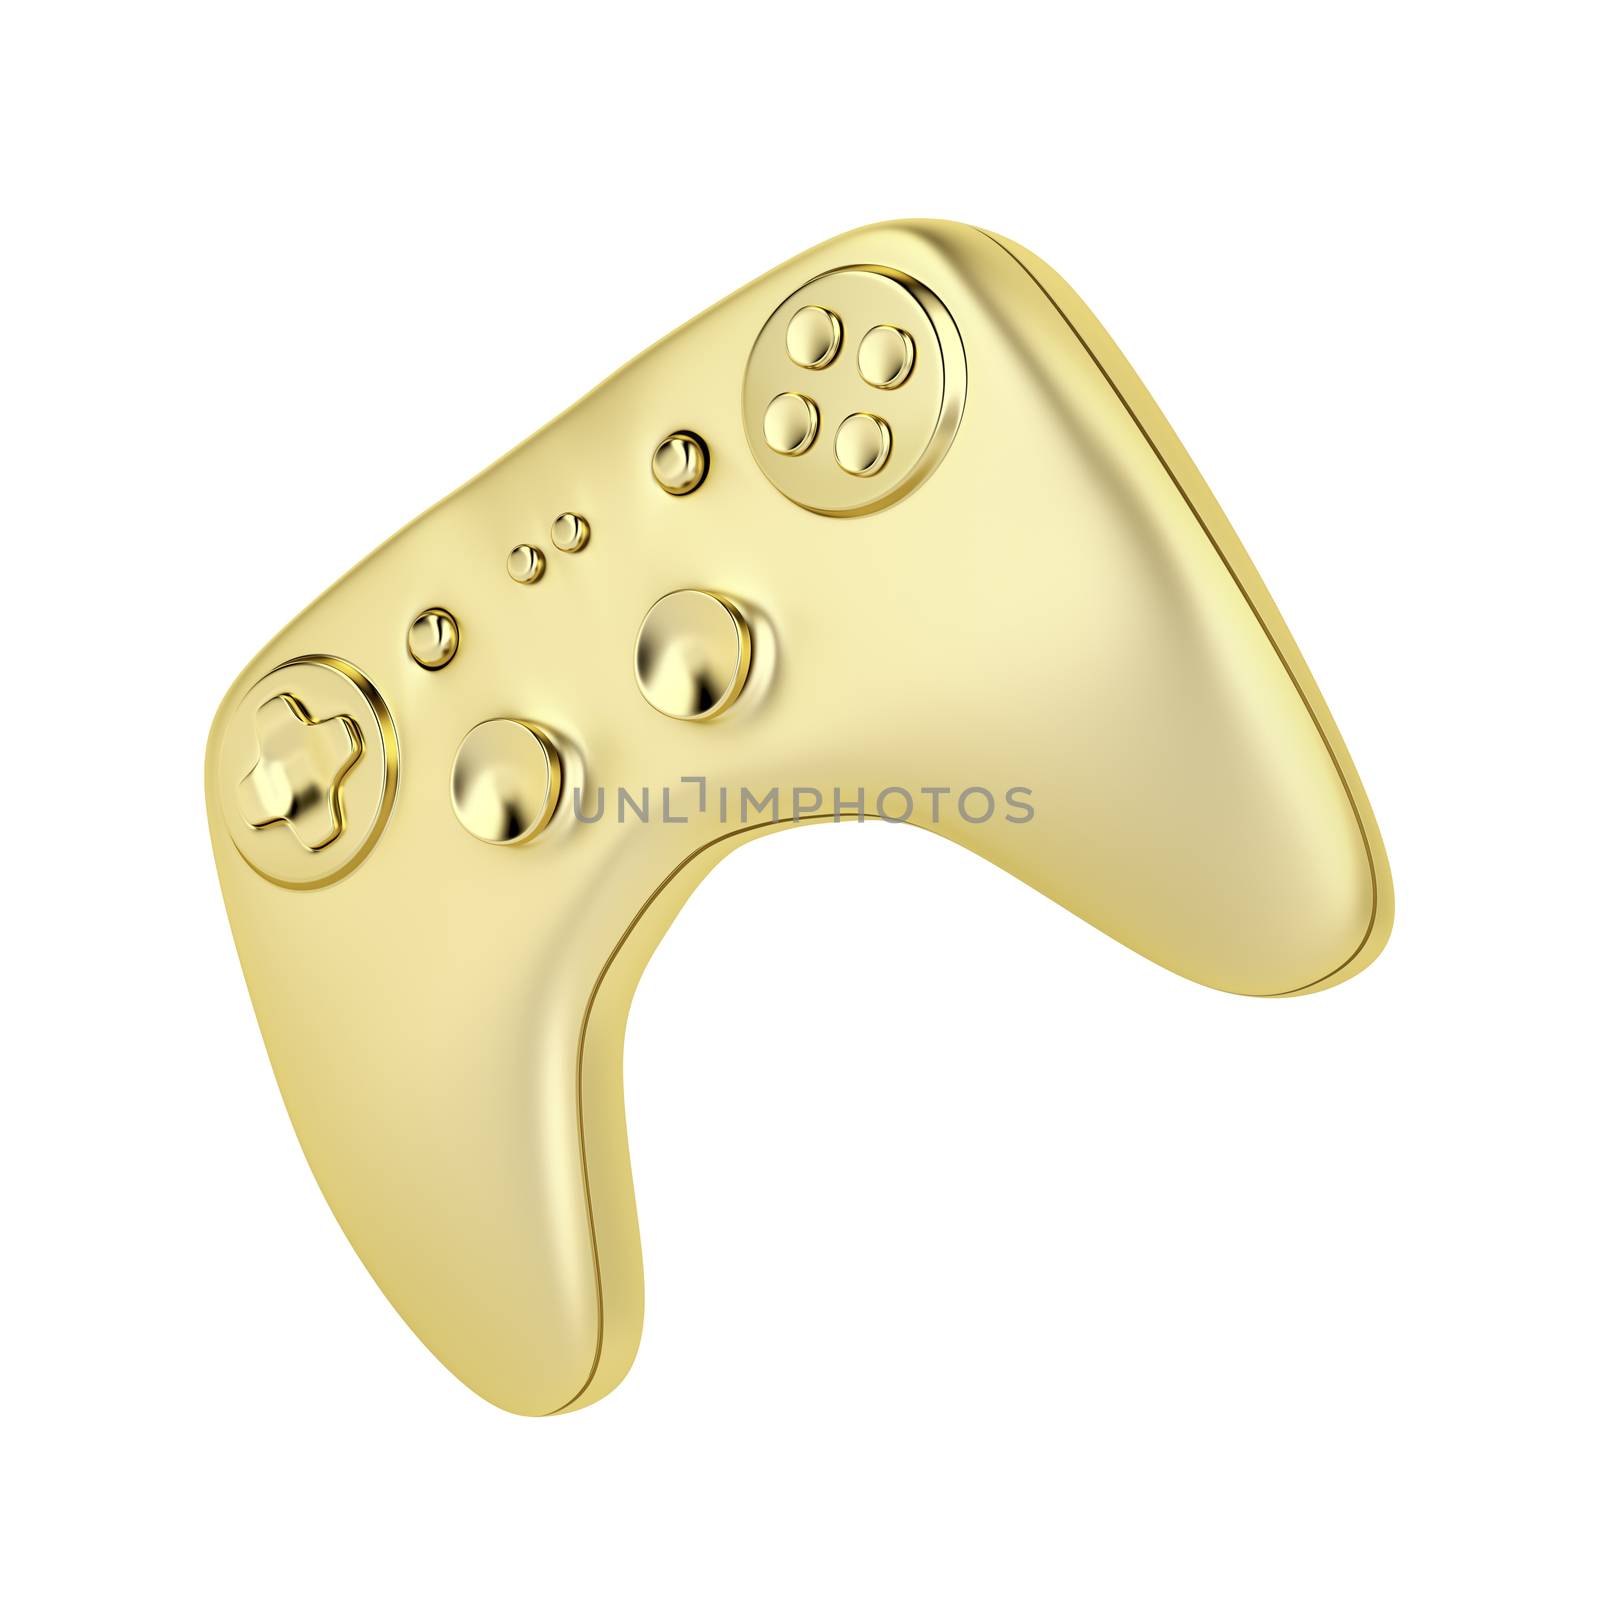 Golden gaming controller isolated on white background